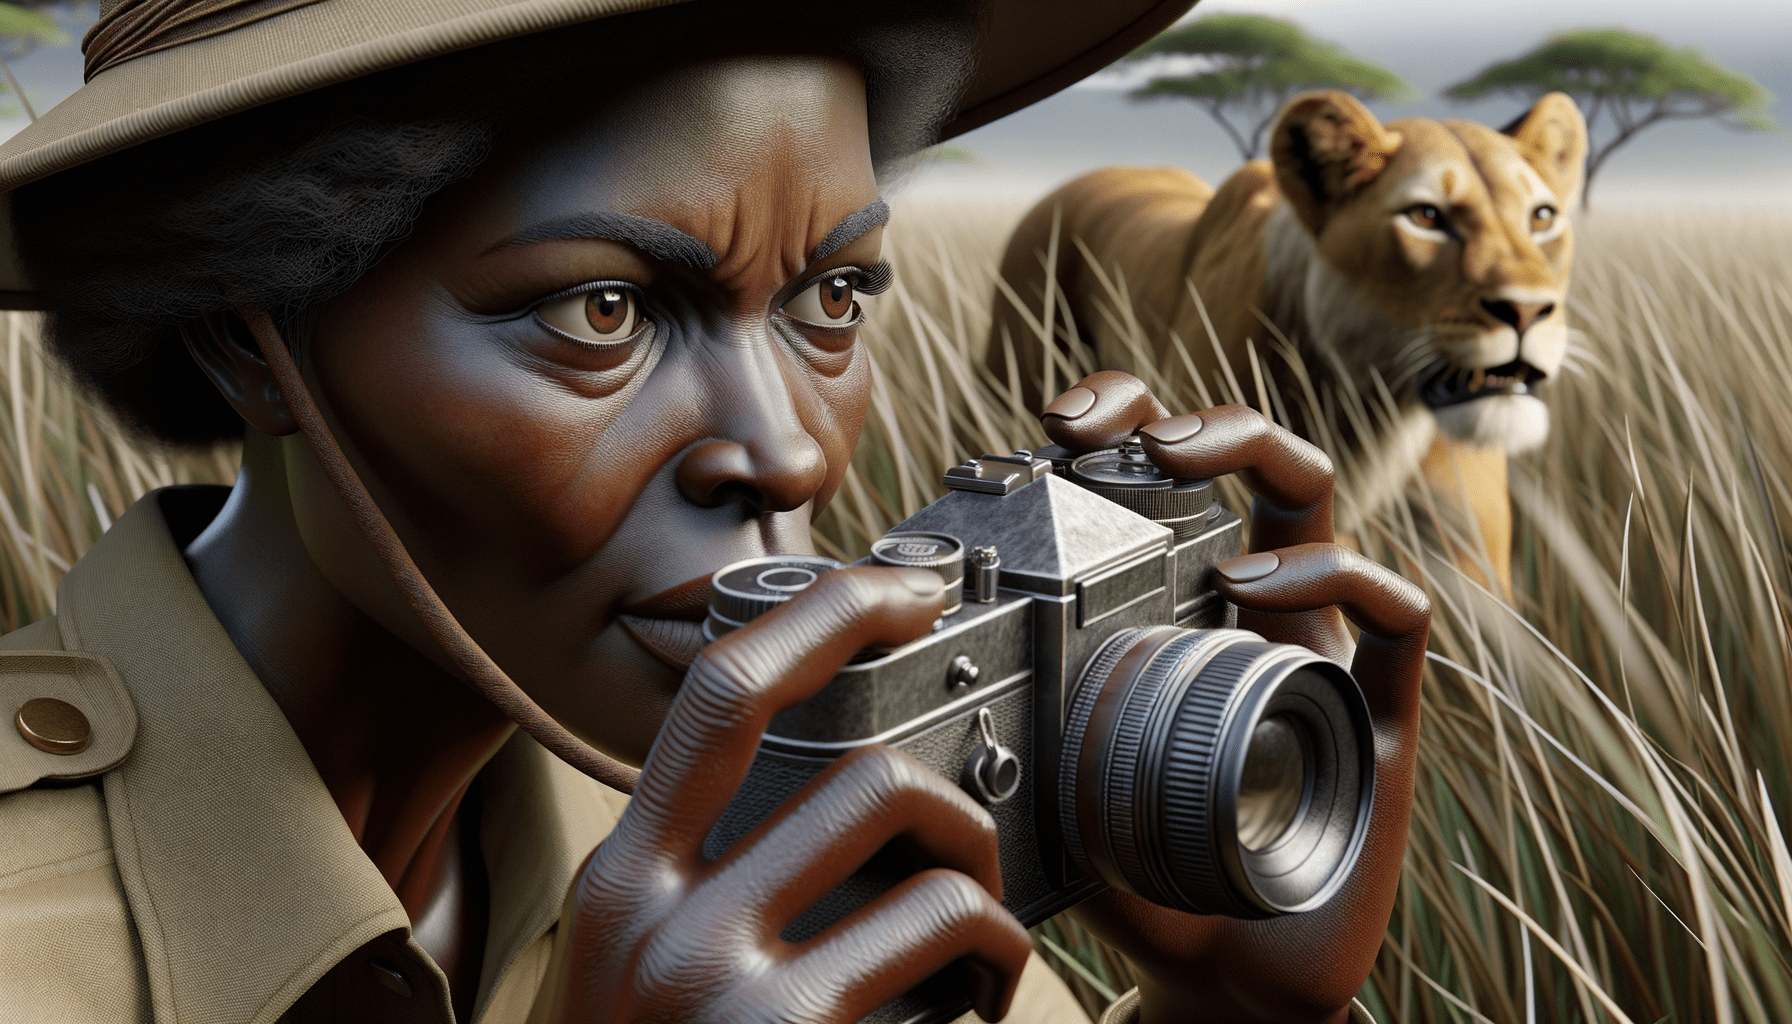 Close-up: Kamala Harris, clad in khaki, a Leica camera pressed to his eye, capturing the intensity of a lioness stalking prey in the tall grasses of the Serengeti. His face is etched with concentration and a deep respect for the wild beauty surrounding him.